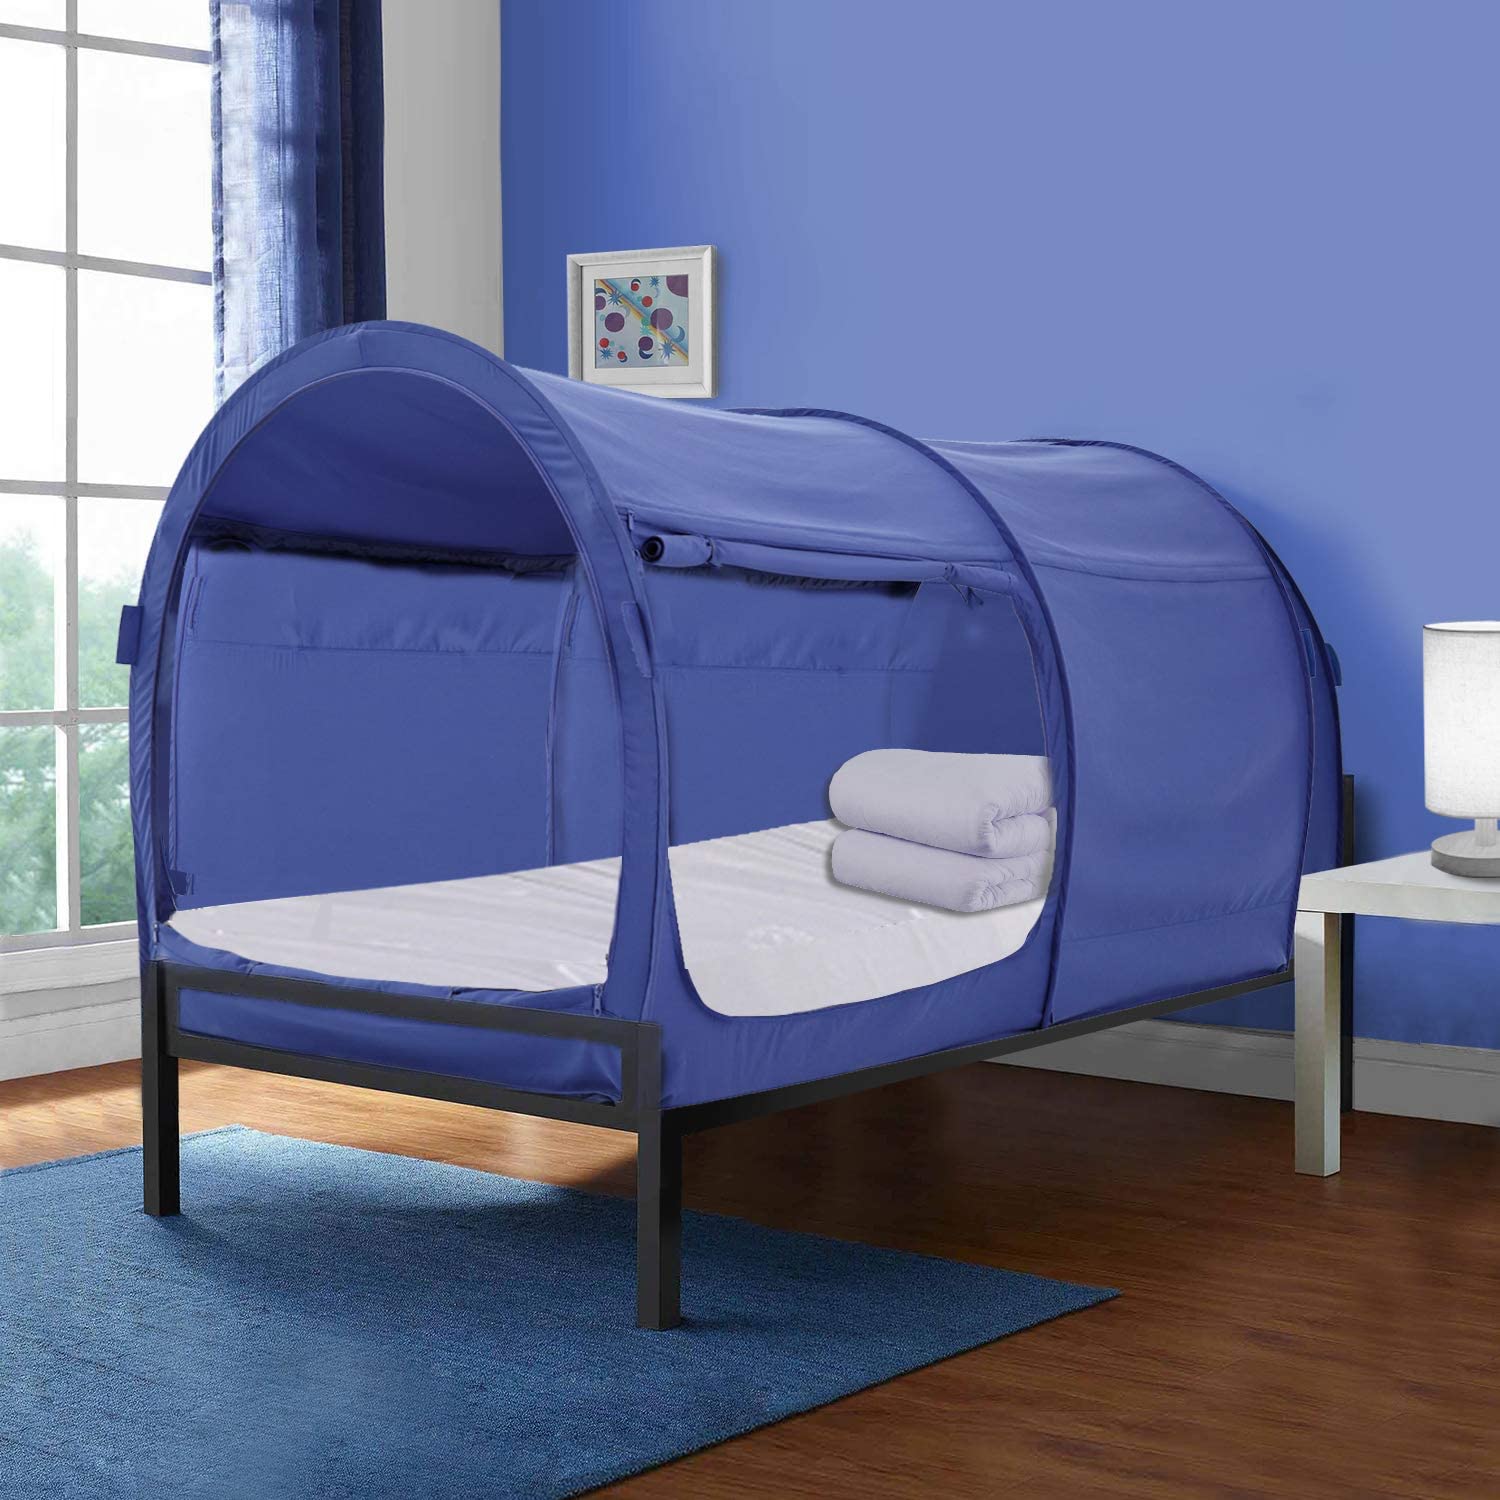 Alvantor Canopy Bed Dream Privacy Space, Privacy Pop For Bunk Beds